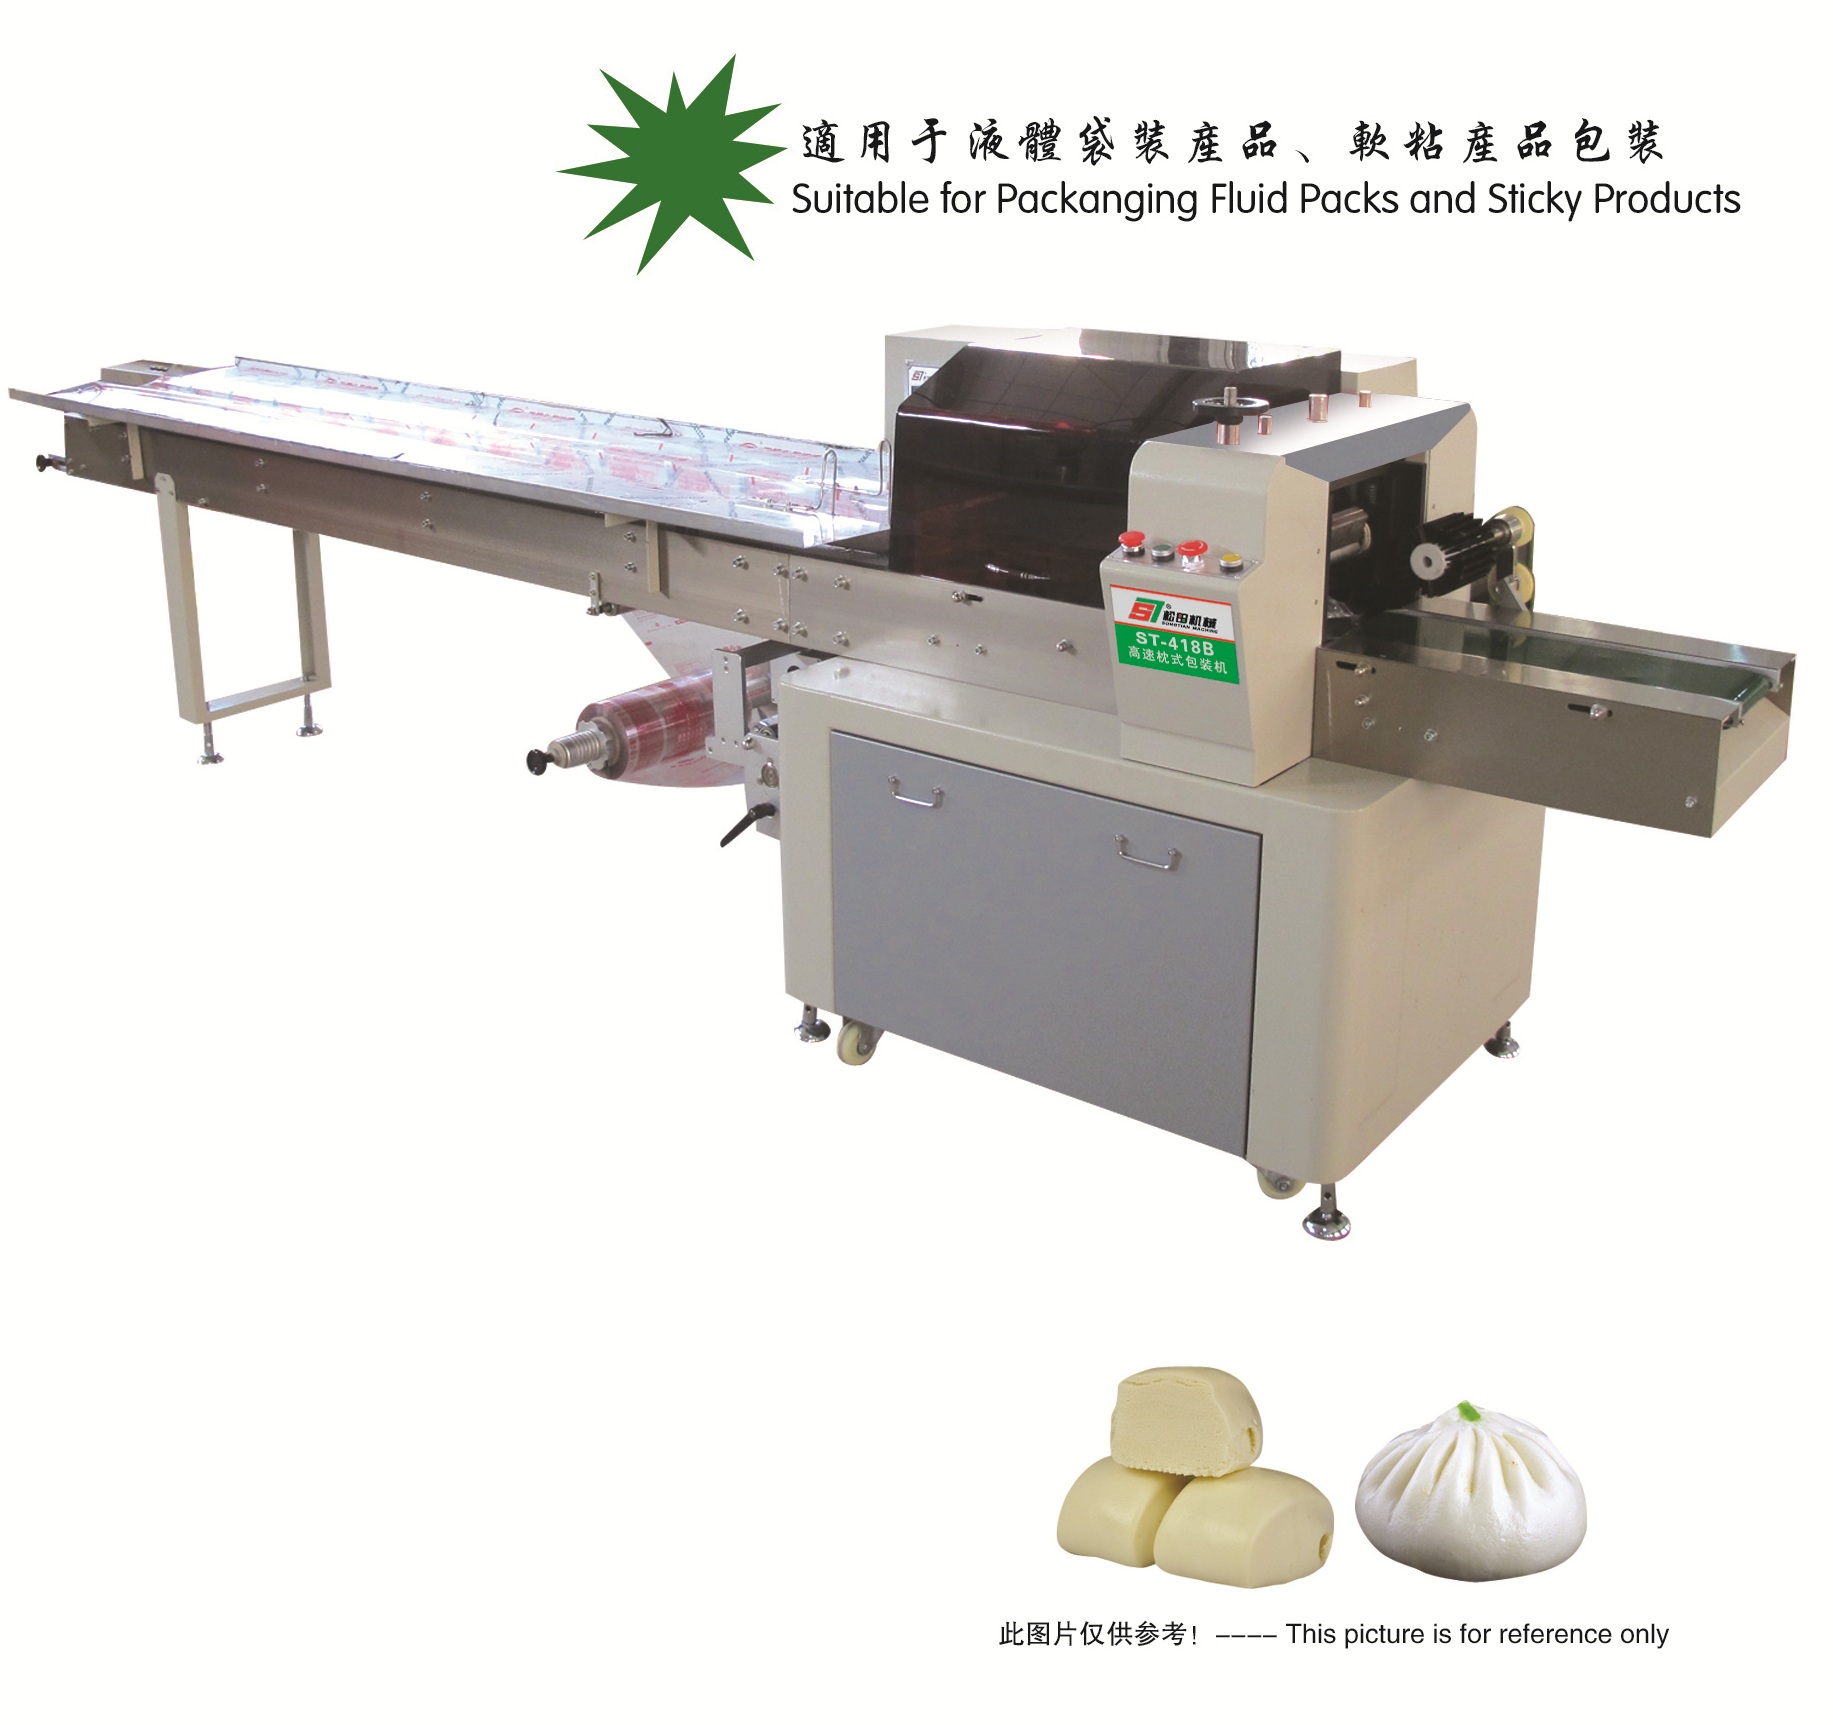 Horizontal type automatic double frequency high-speed packing machine